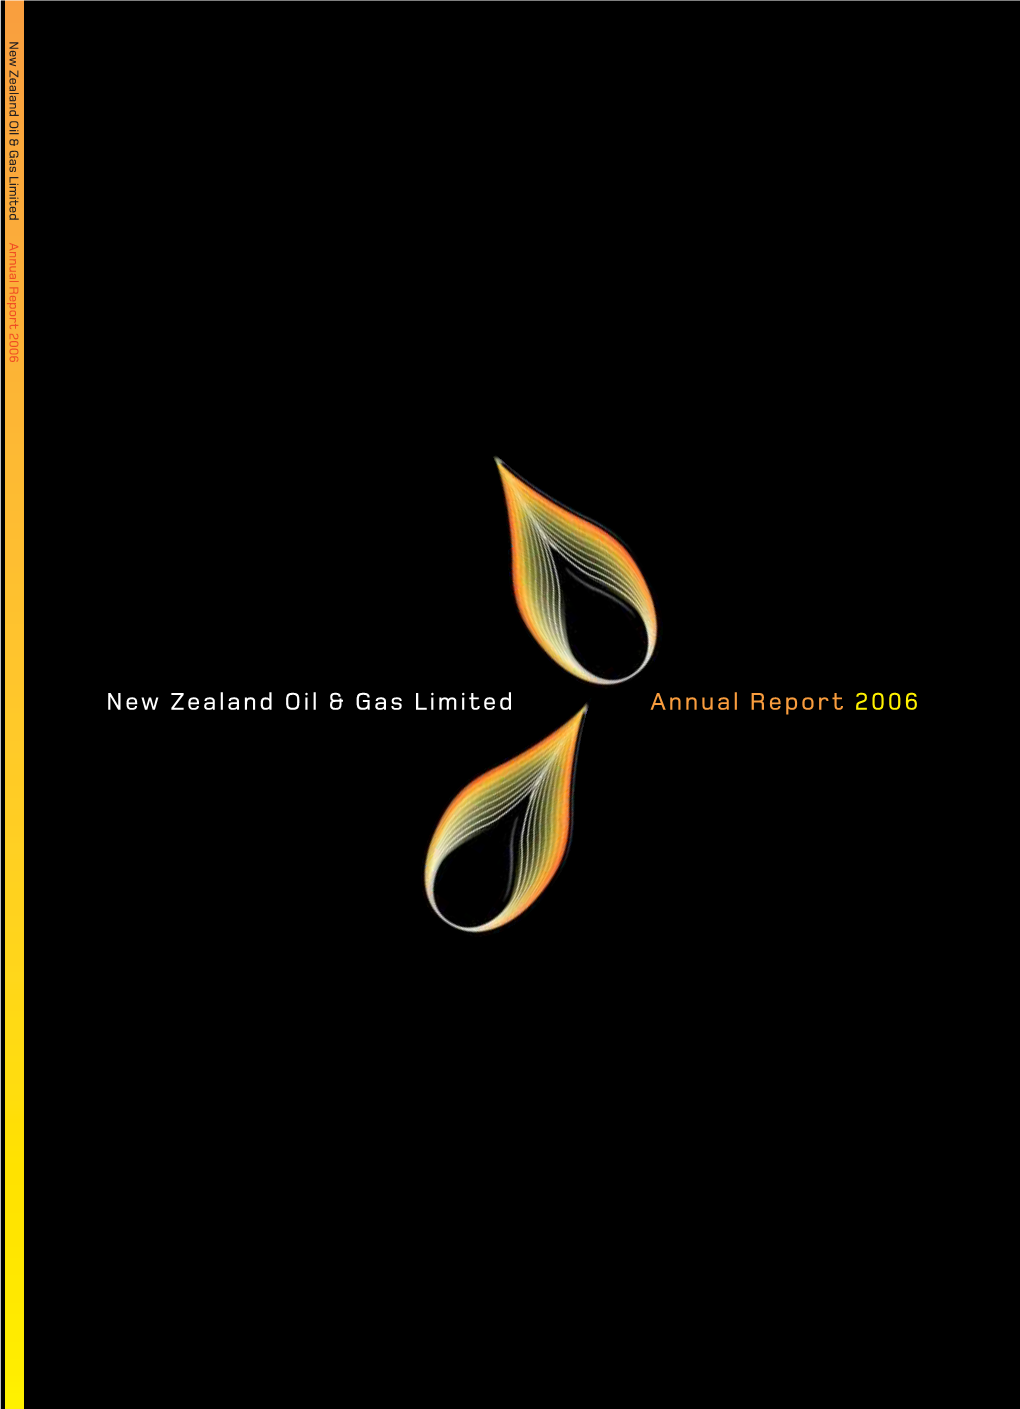 New Zealand Oil & Gas Limited Annual Report 2006